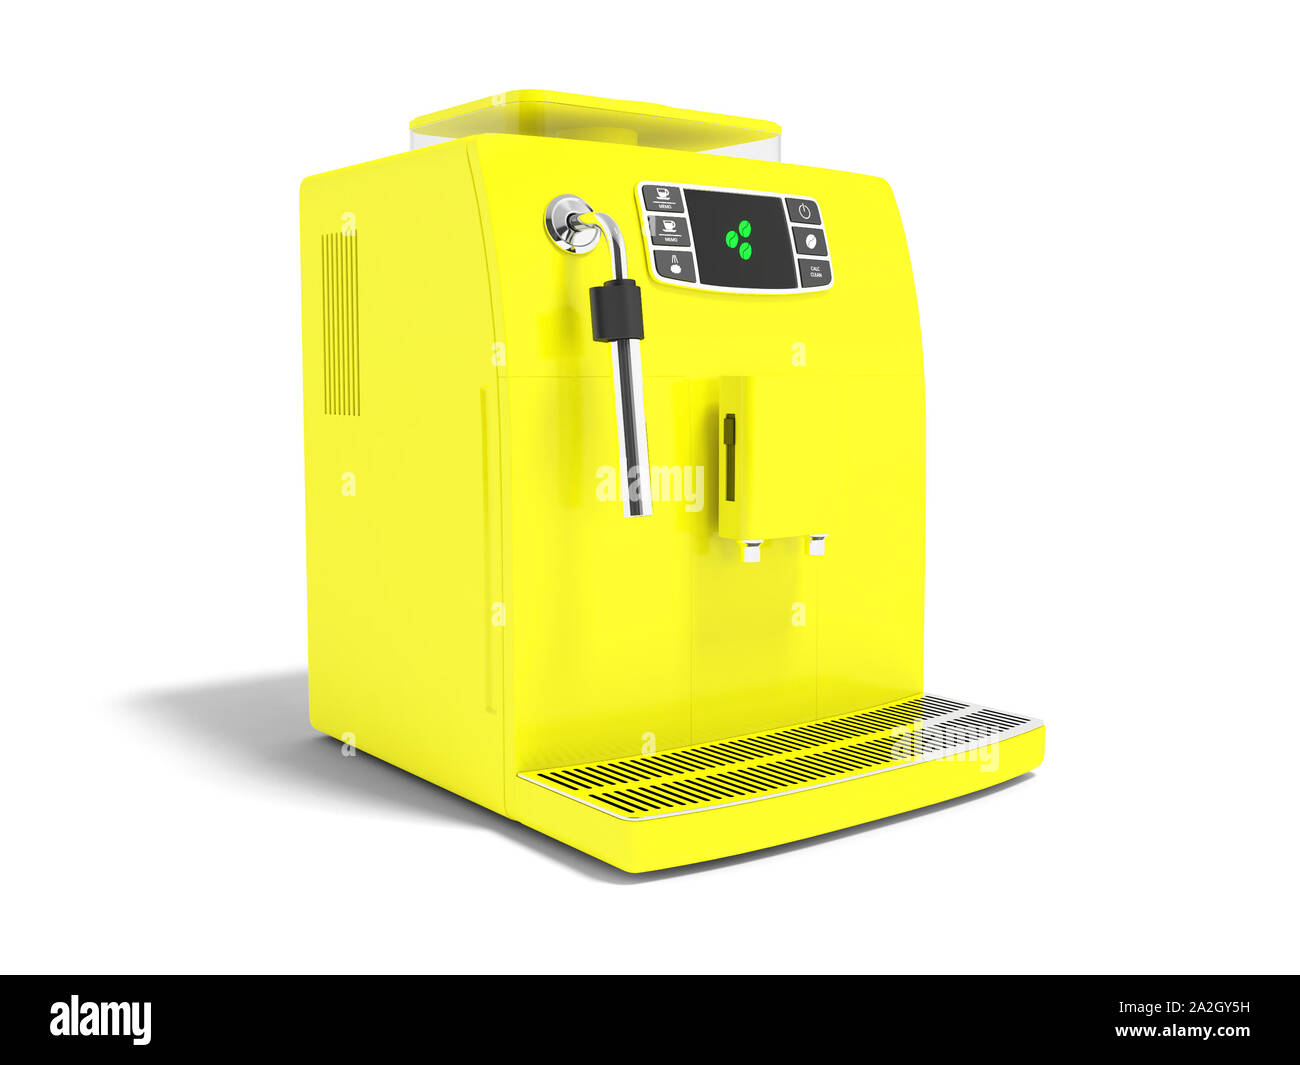 https://c8.alamy.com/comp/2A2GY5H/modern-yellow-coffee-machine-for-two-mugs-for-coffee-for-brewing-3d-render-on-white-background-with-shadow-2A2GY5H.jpg